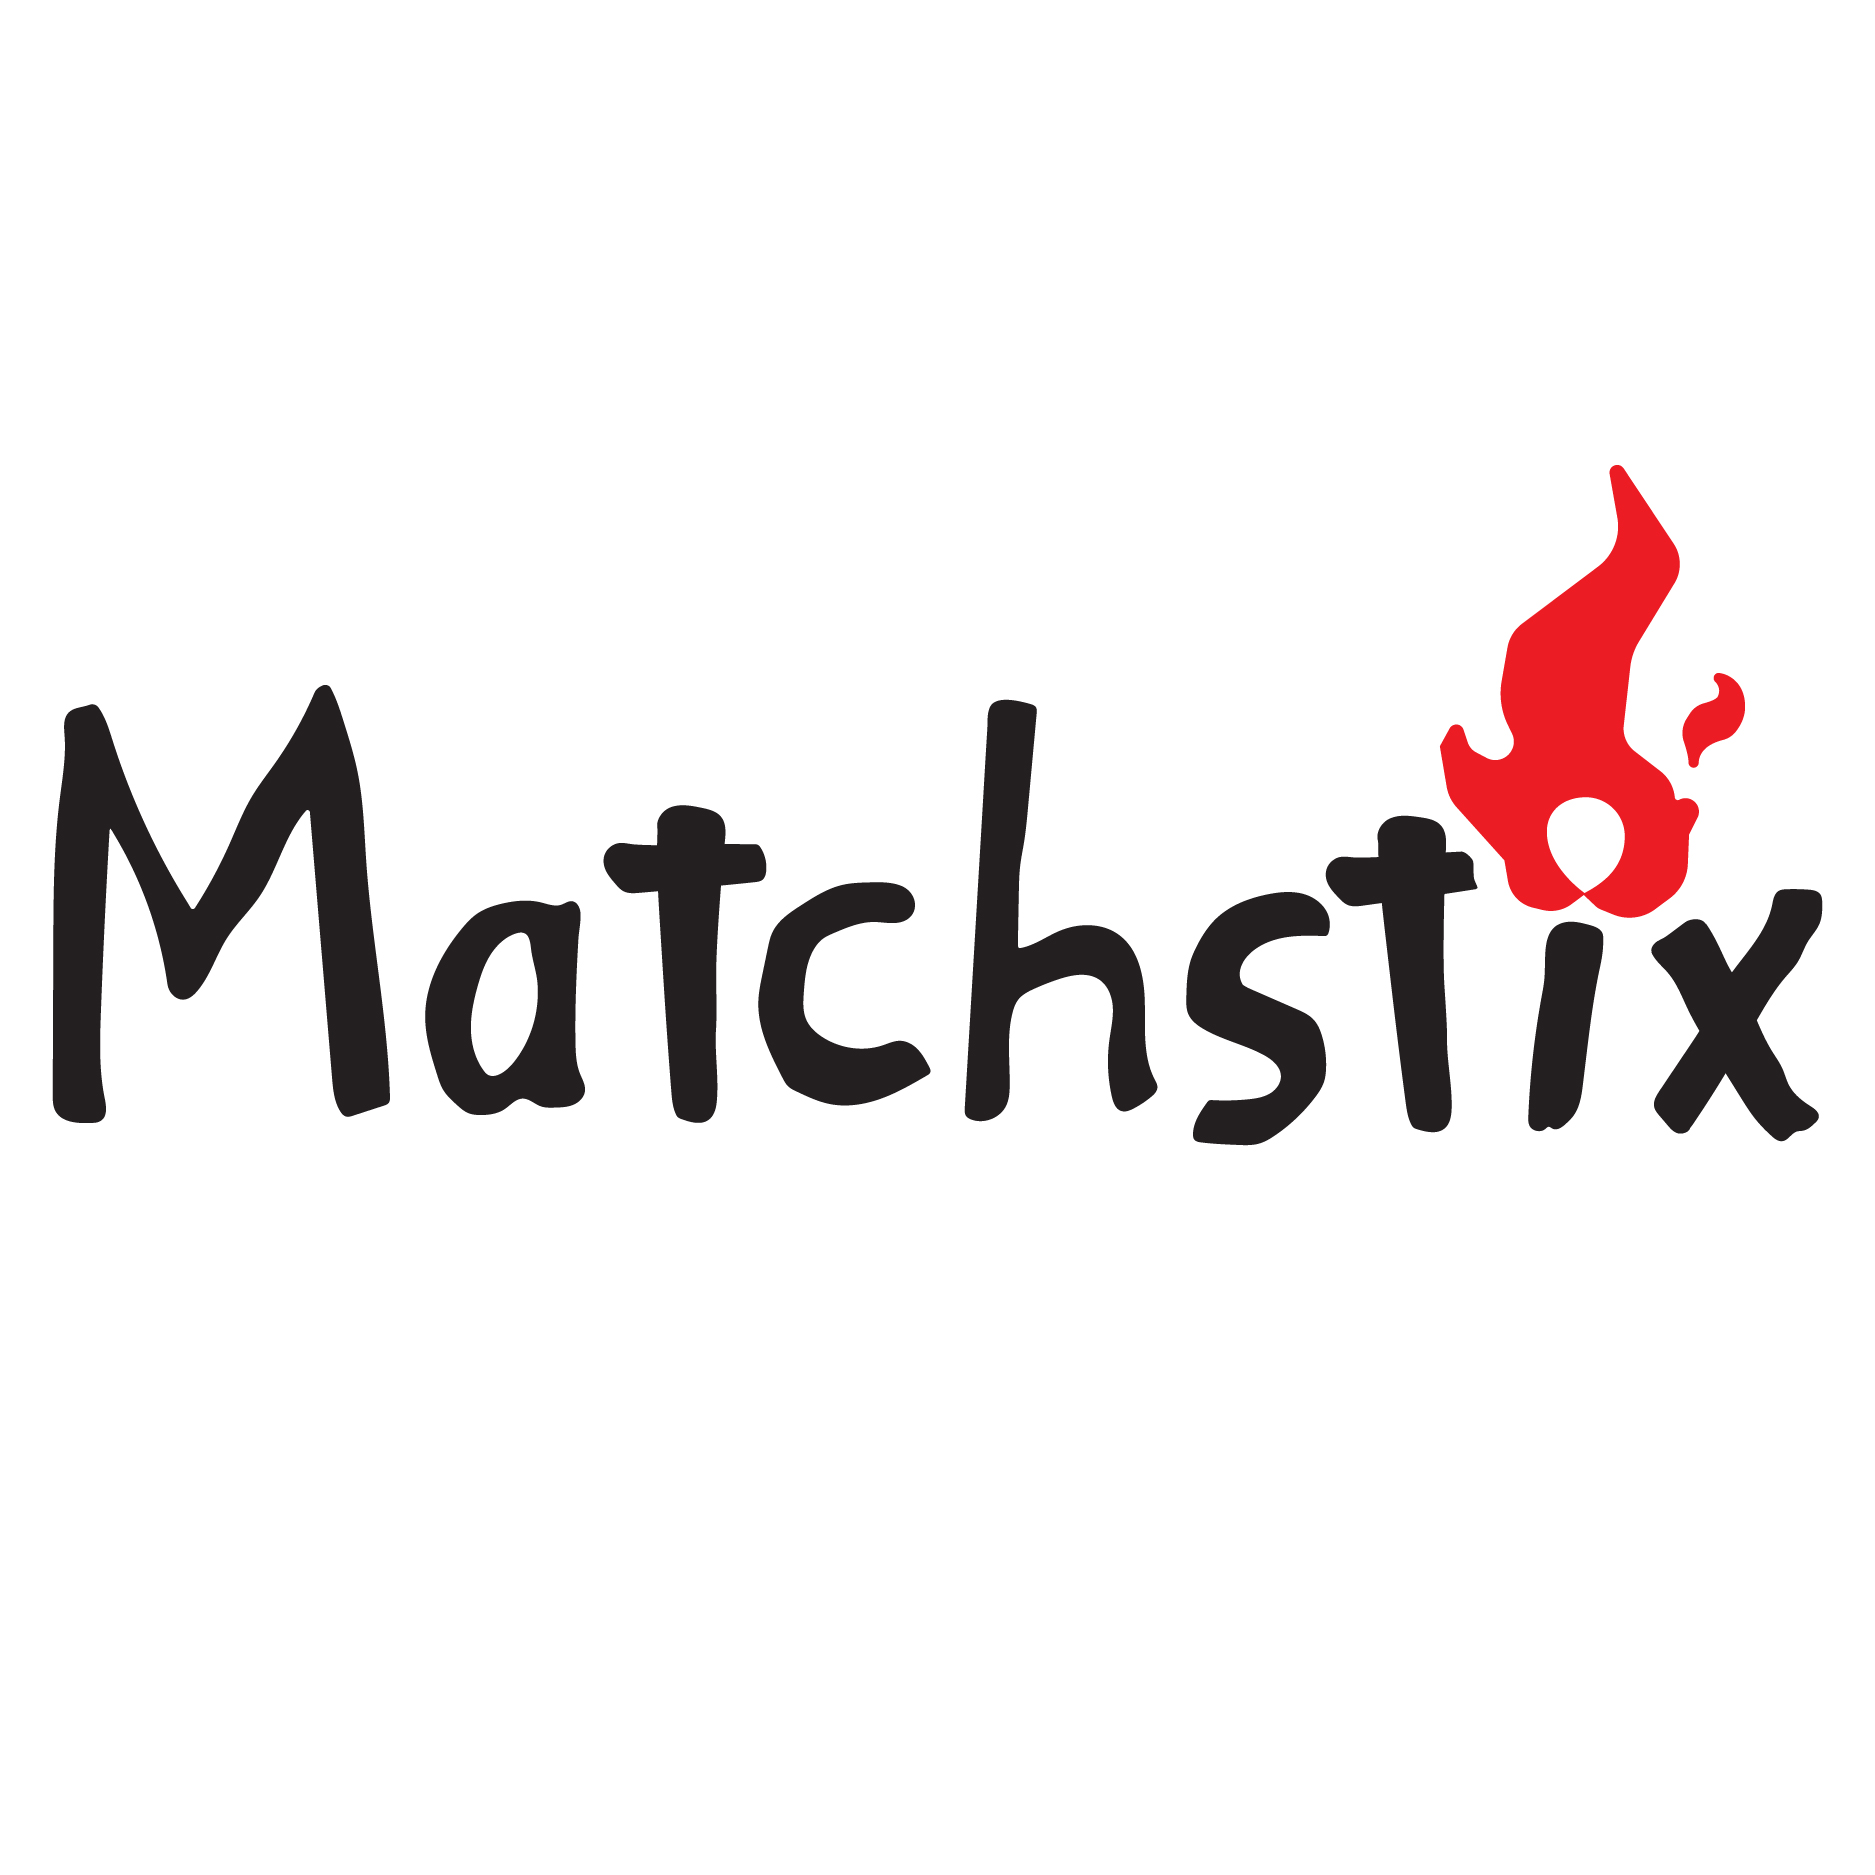 Matchstix  logo design by logo designer MSC Creative for your inspiration and for the worlds largest logo competition